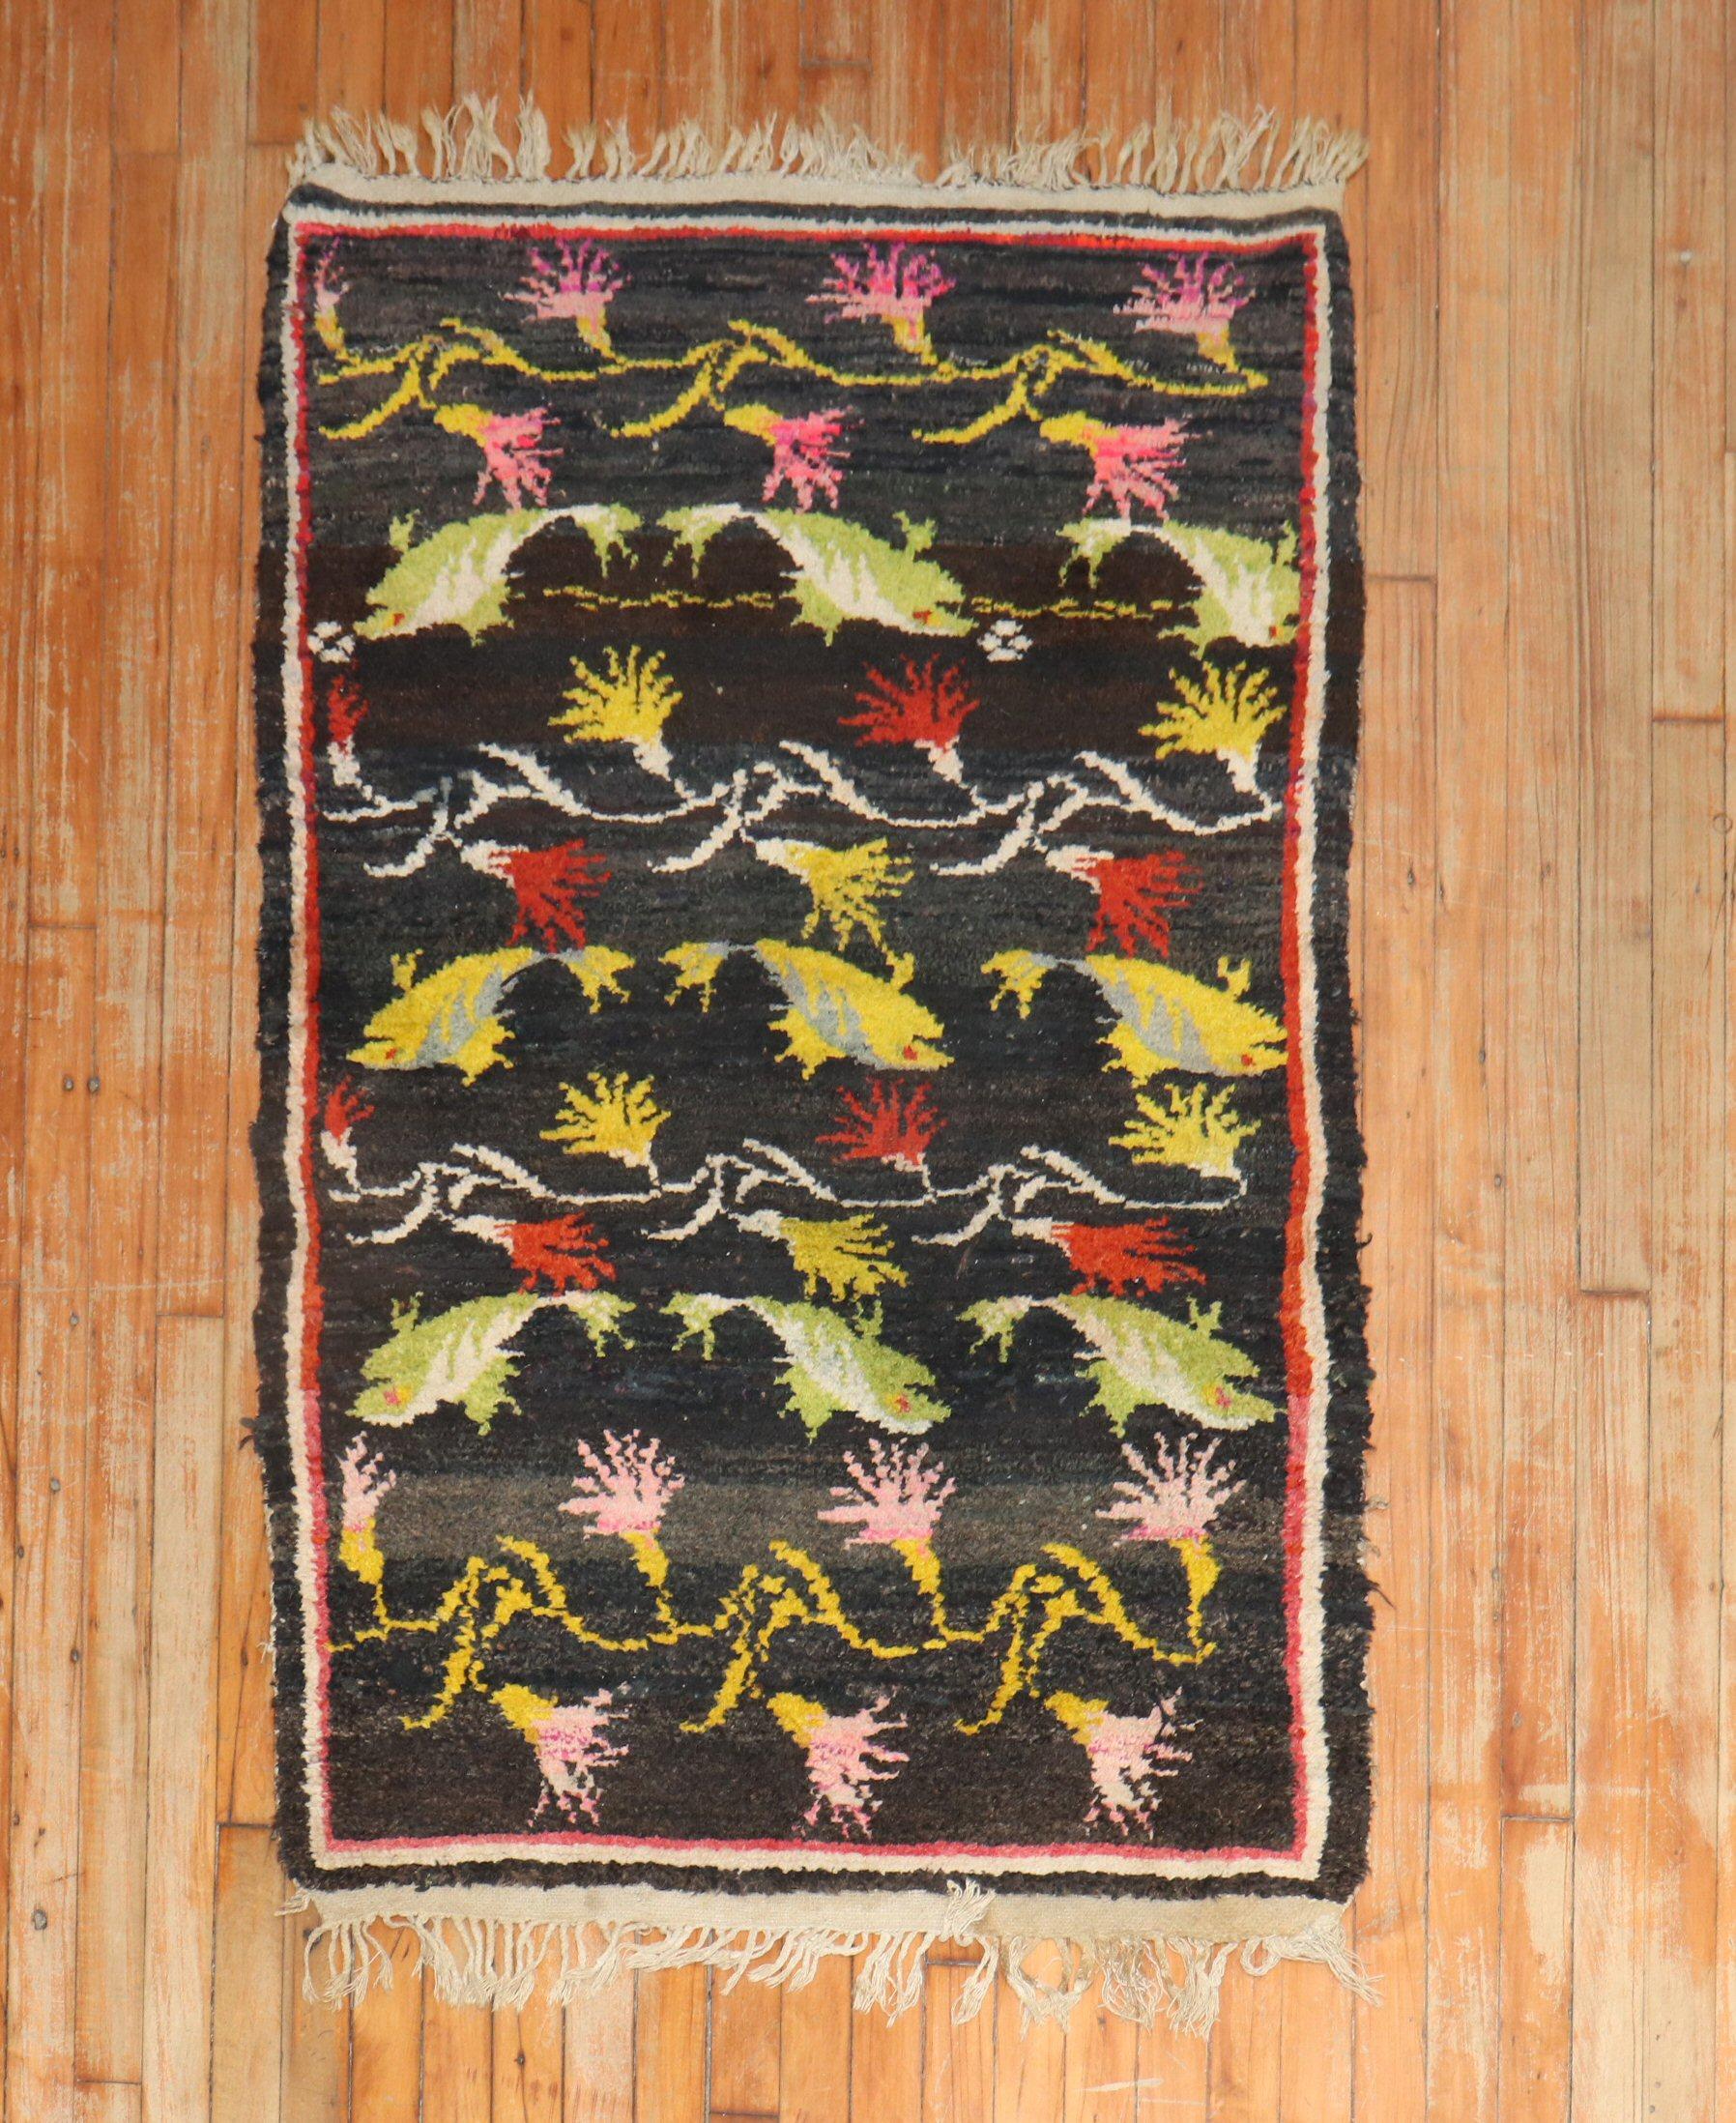 A 2ndquarter of the 20th-century highly decorative Tibetan rug with fishes floating around a floral motif on a dark ground color. 

Size: 2'10'' x 4'9''.

